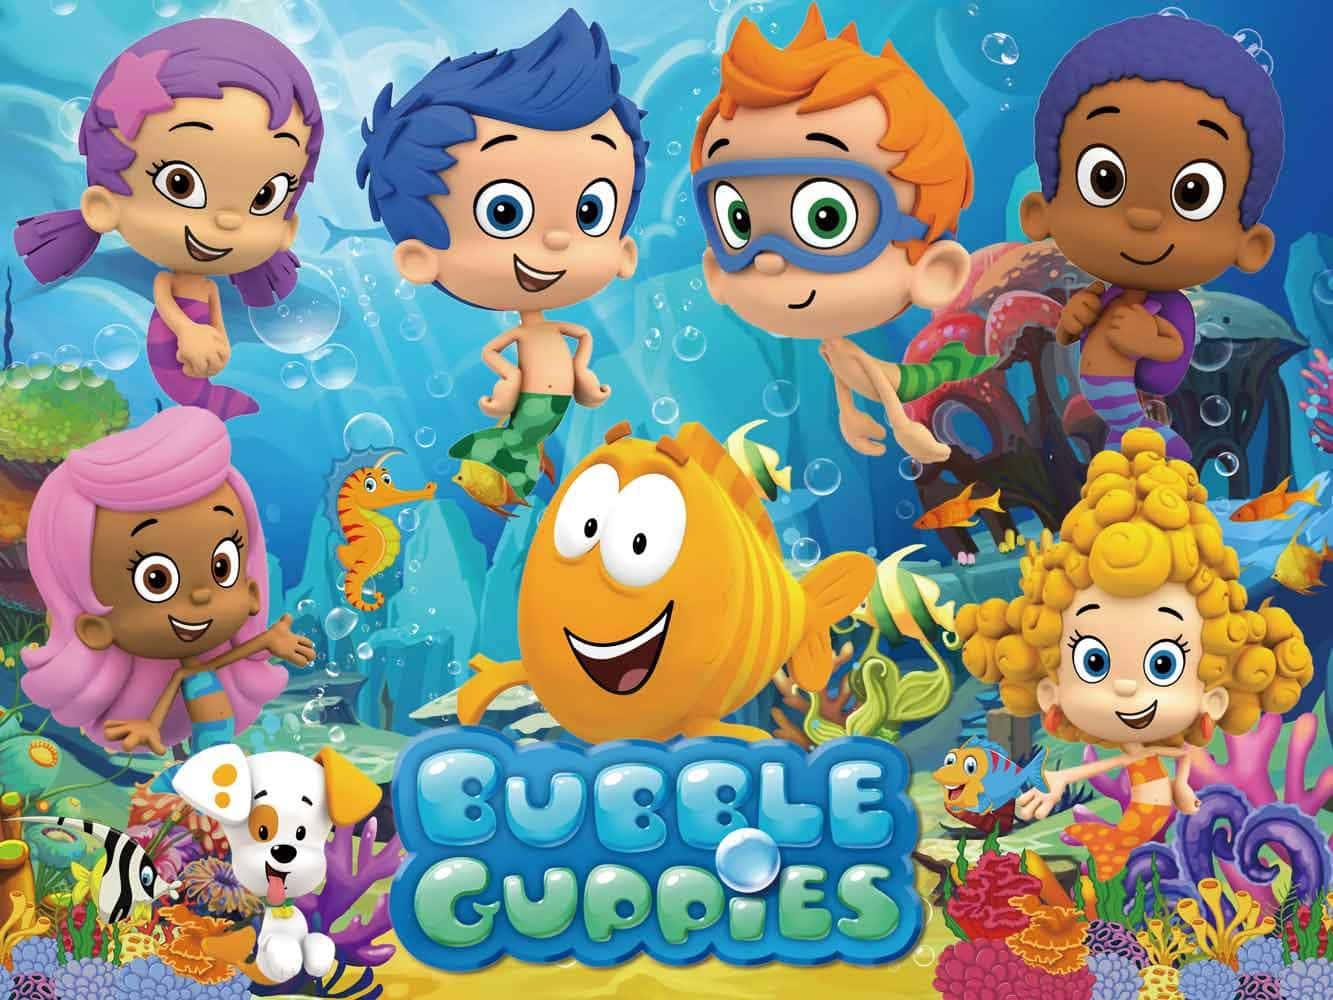 Bubble Guppies wallpaper by adribal  Download on ZEDGE  adf5